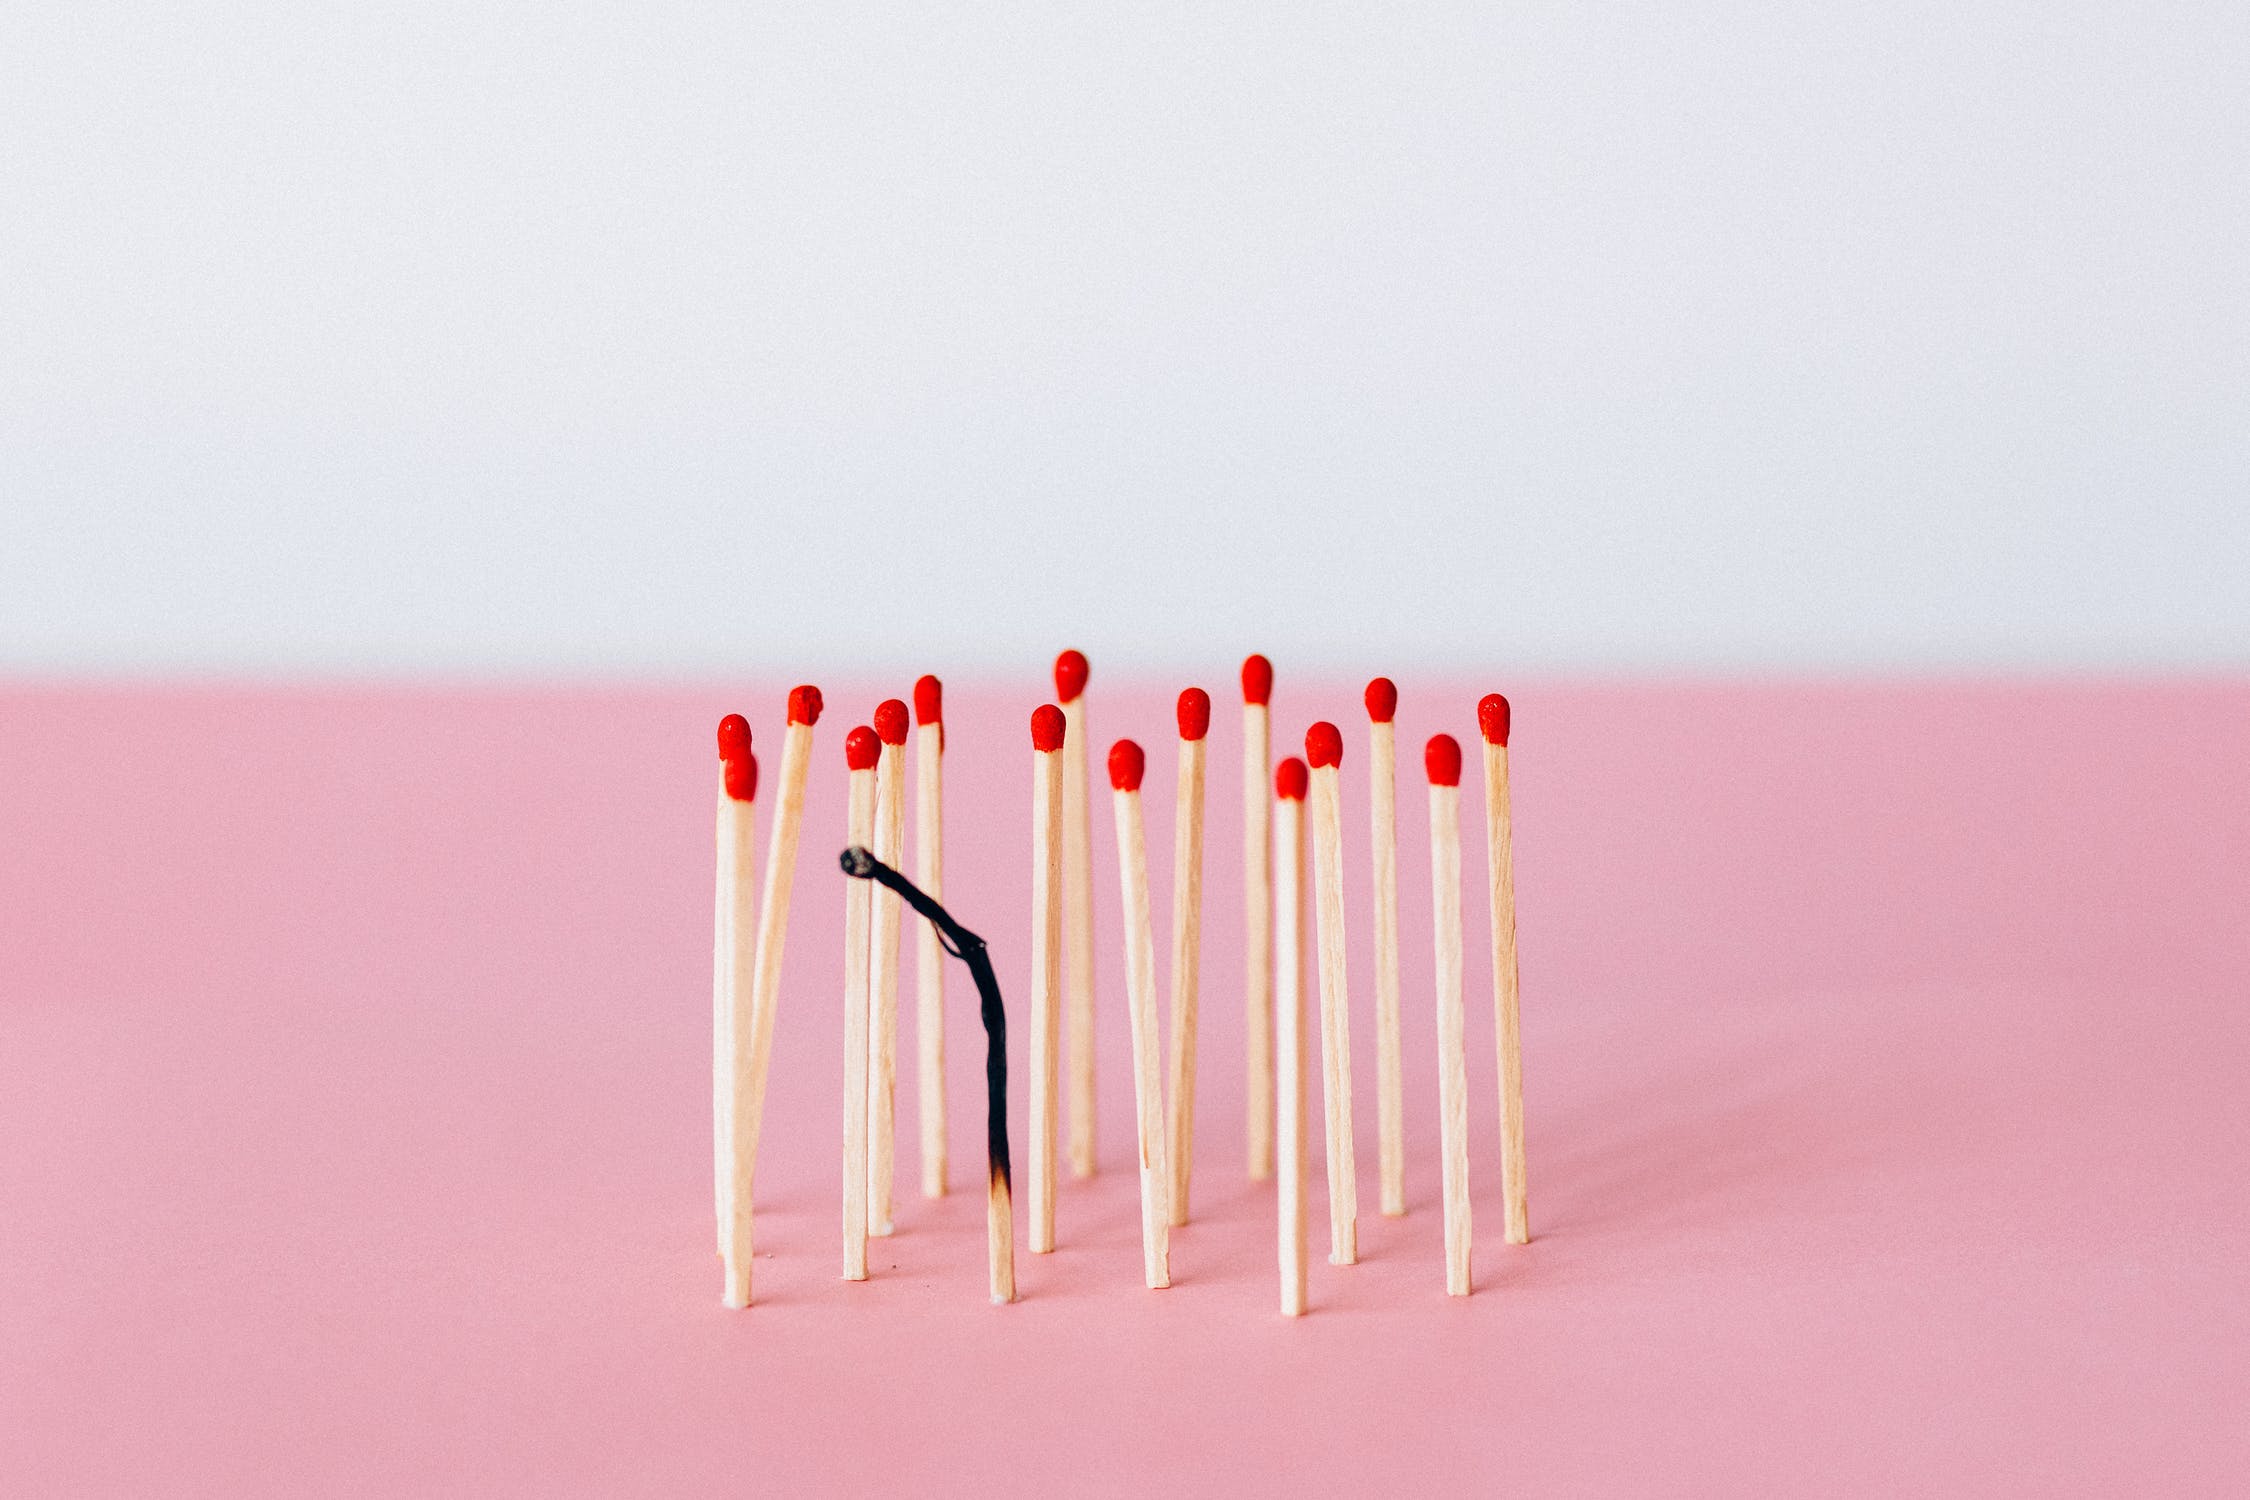 a group of matches with one burnt out against a pink background